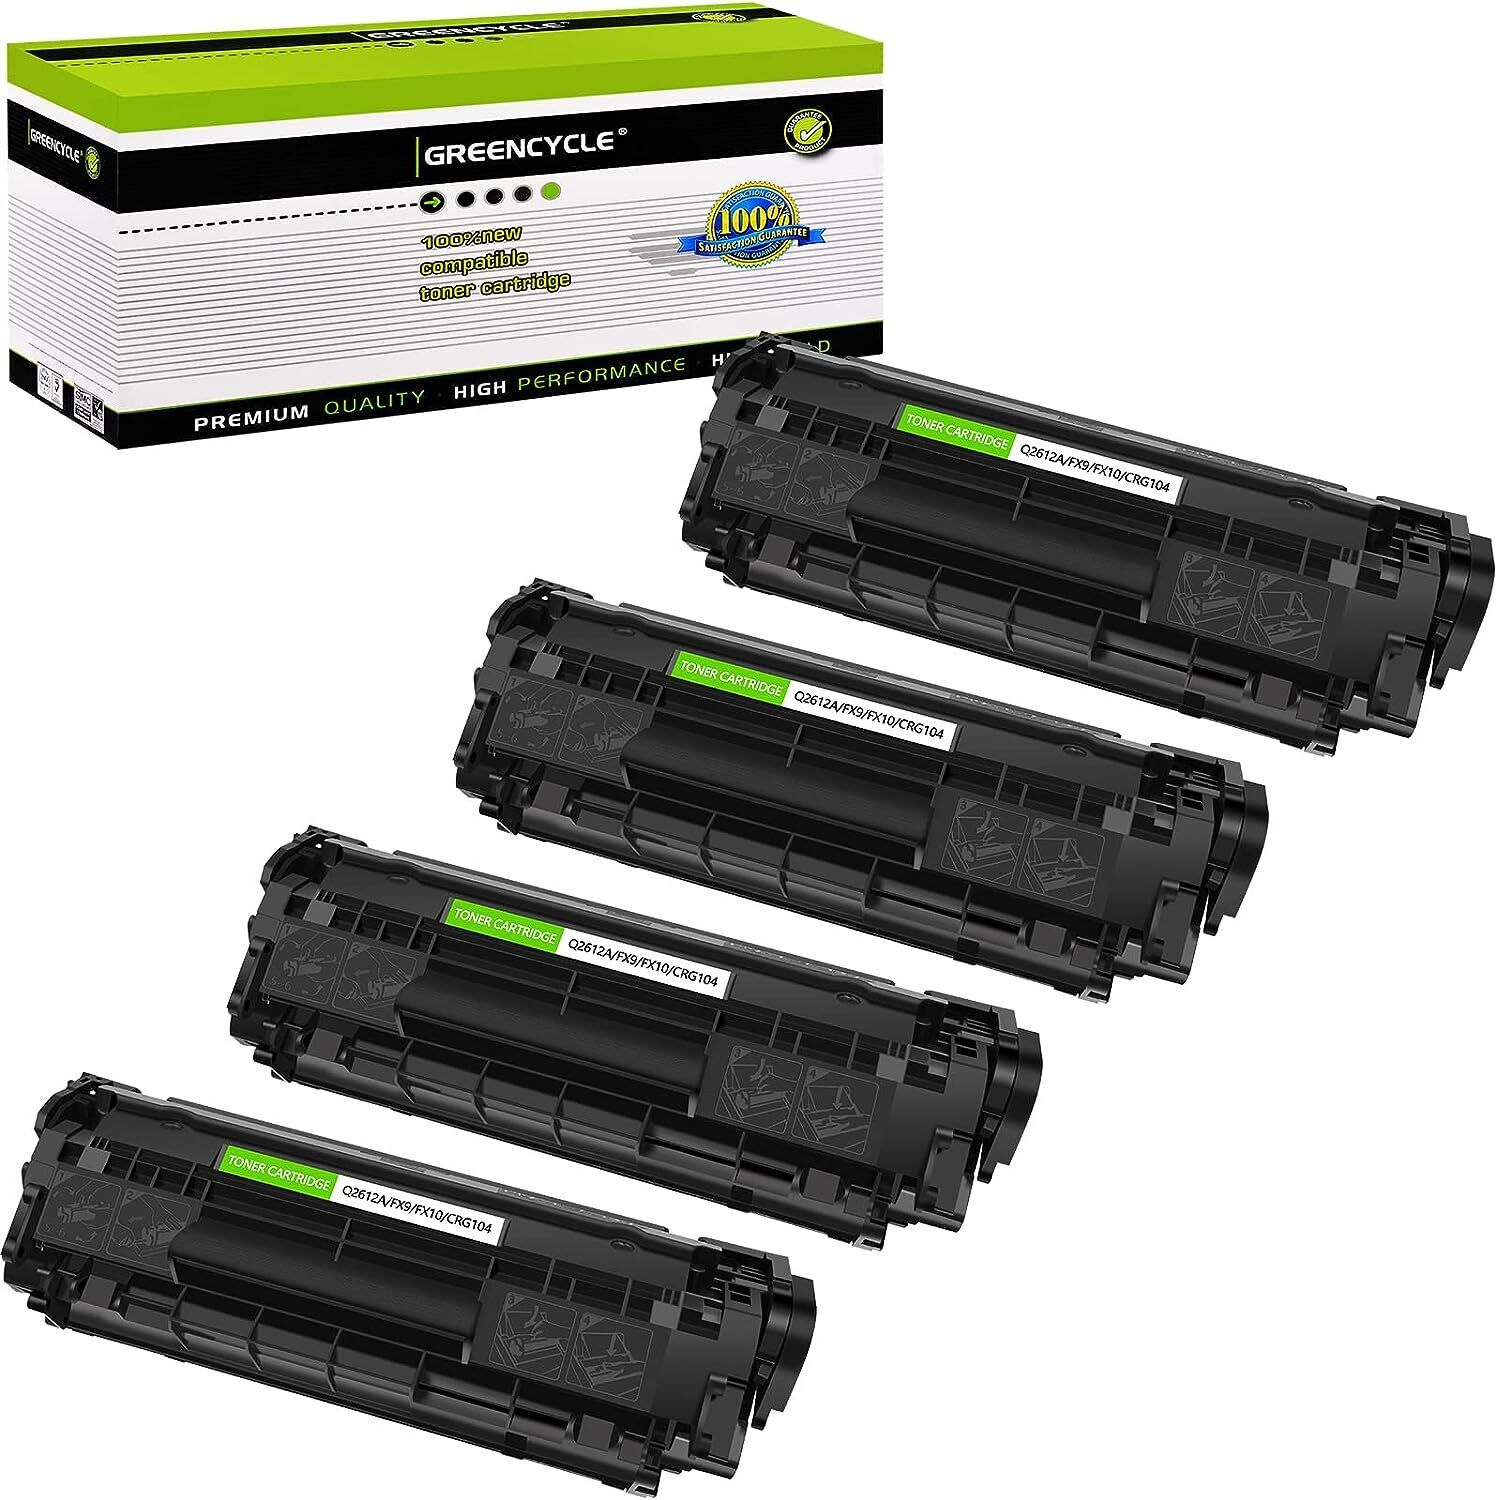 4PK greencycle Compatible Toner Cartridge CRG104 FX9 FX10 for Canon MF4100 MF411